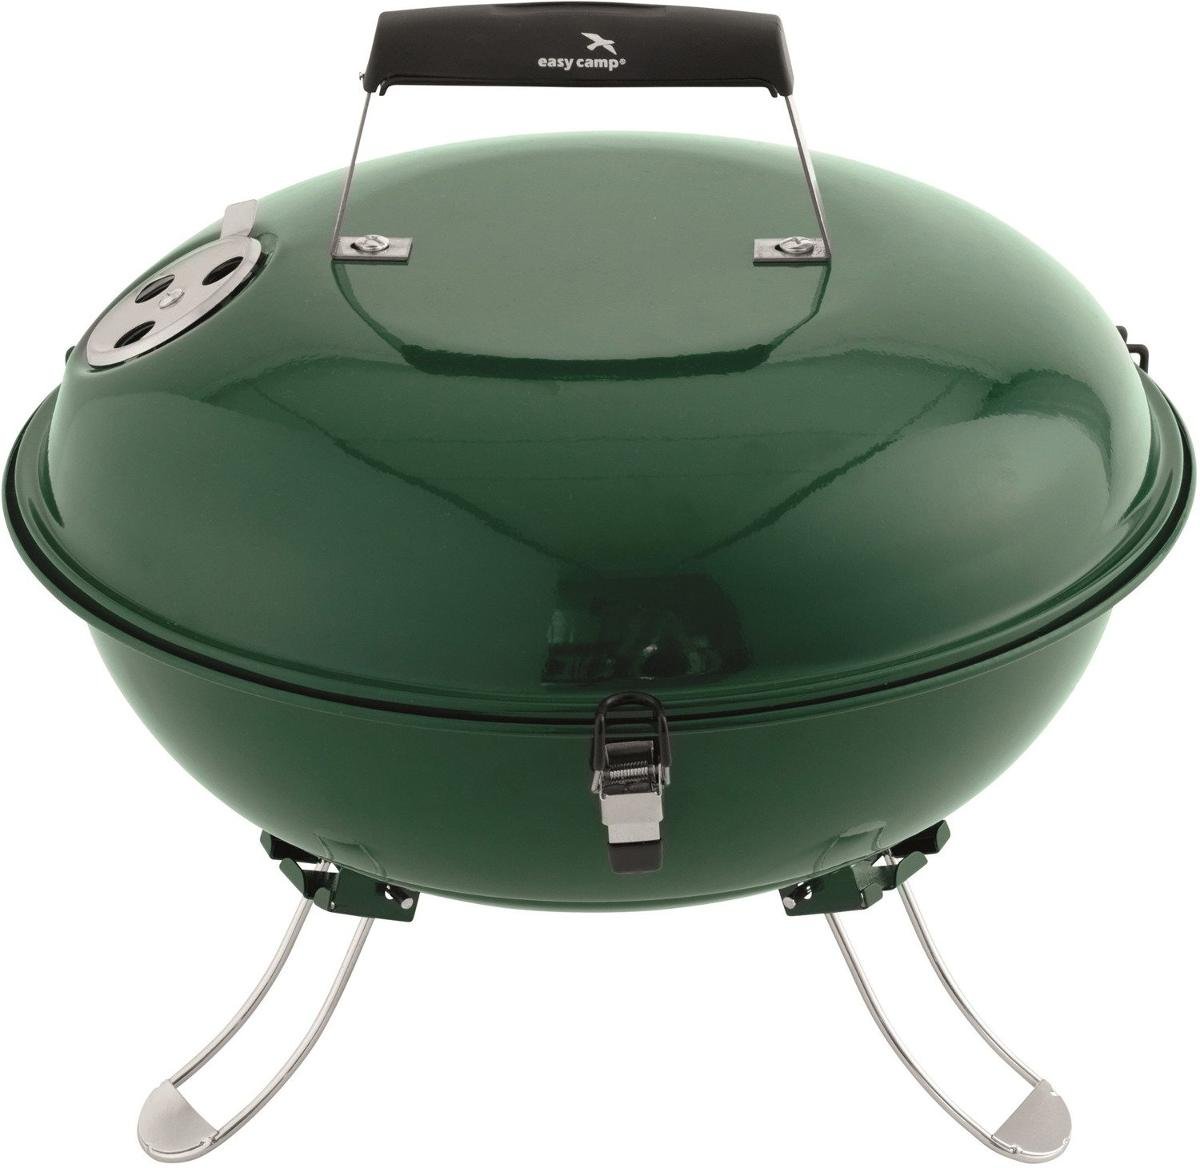 Easy Camp Adventure Grill Green 680195